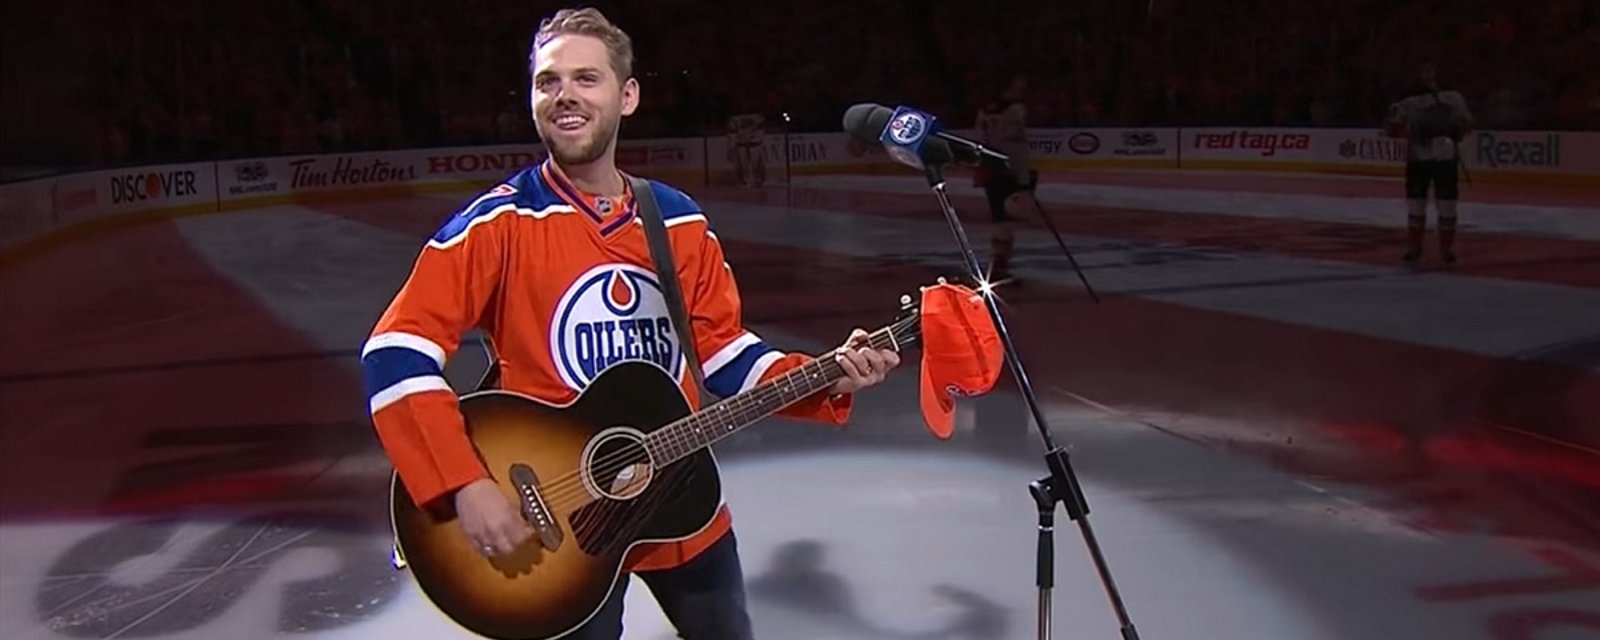 Microphone breaks during national anthem in Edmonton, and then magic happens.